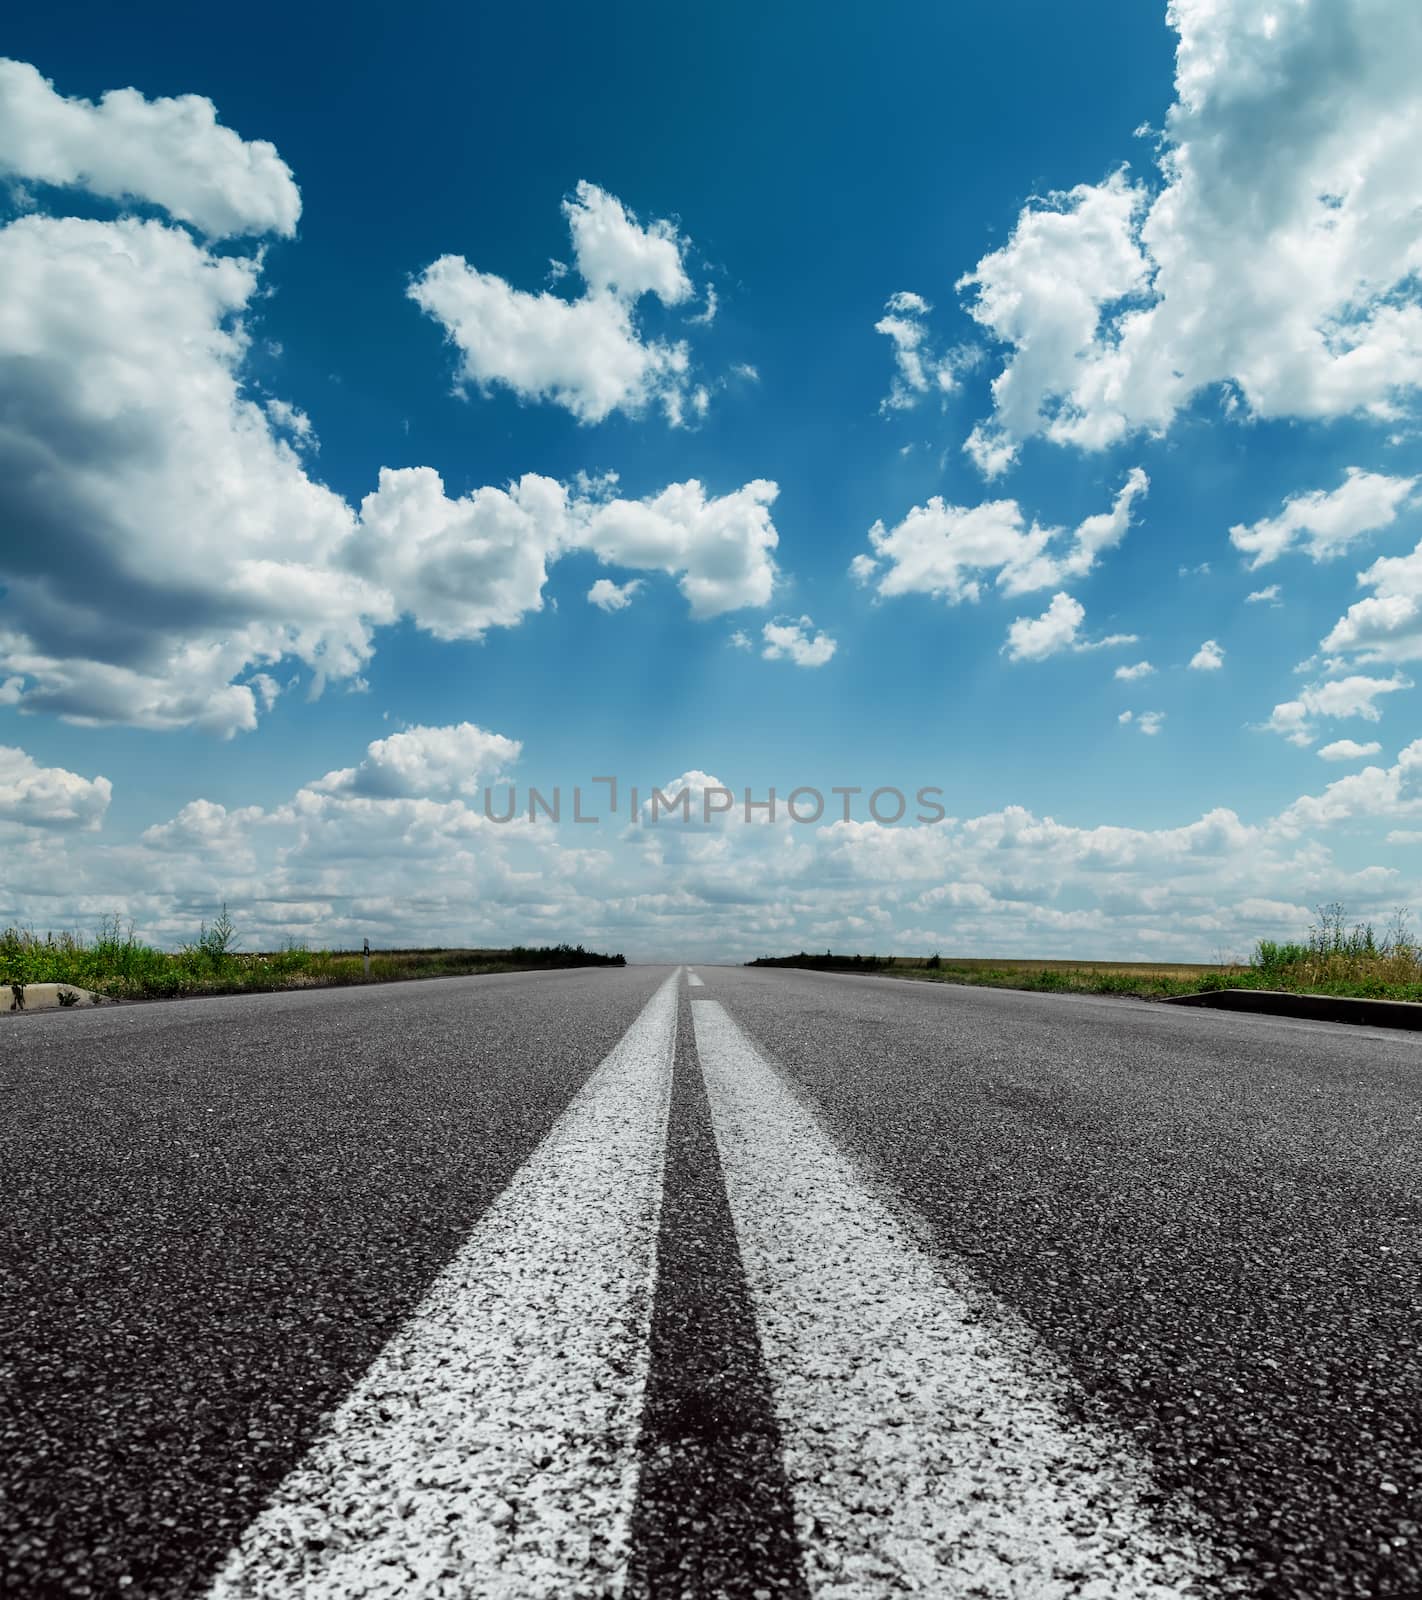 two white lines on black road and dramatic sky with clouds over  by mycola